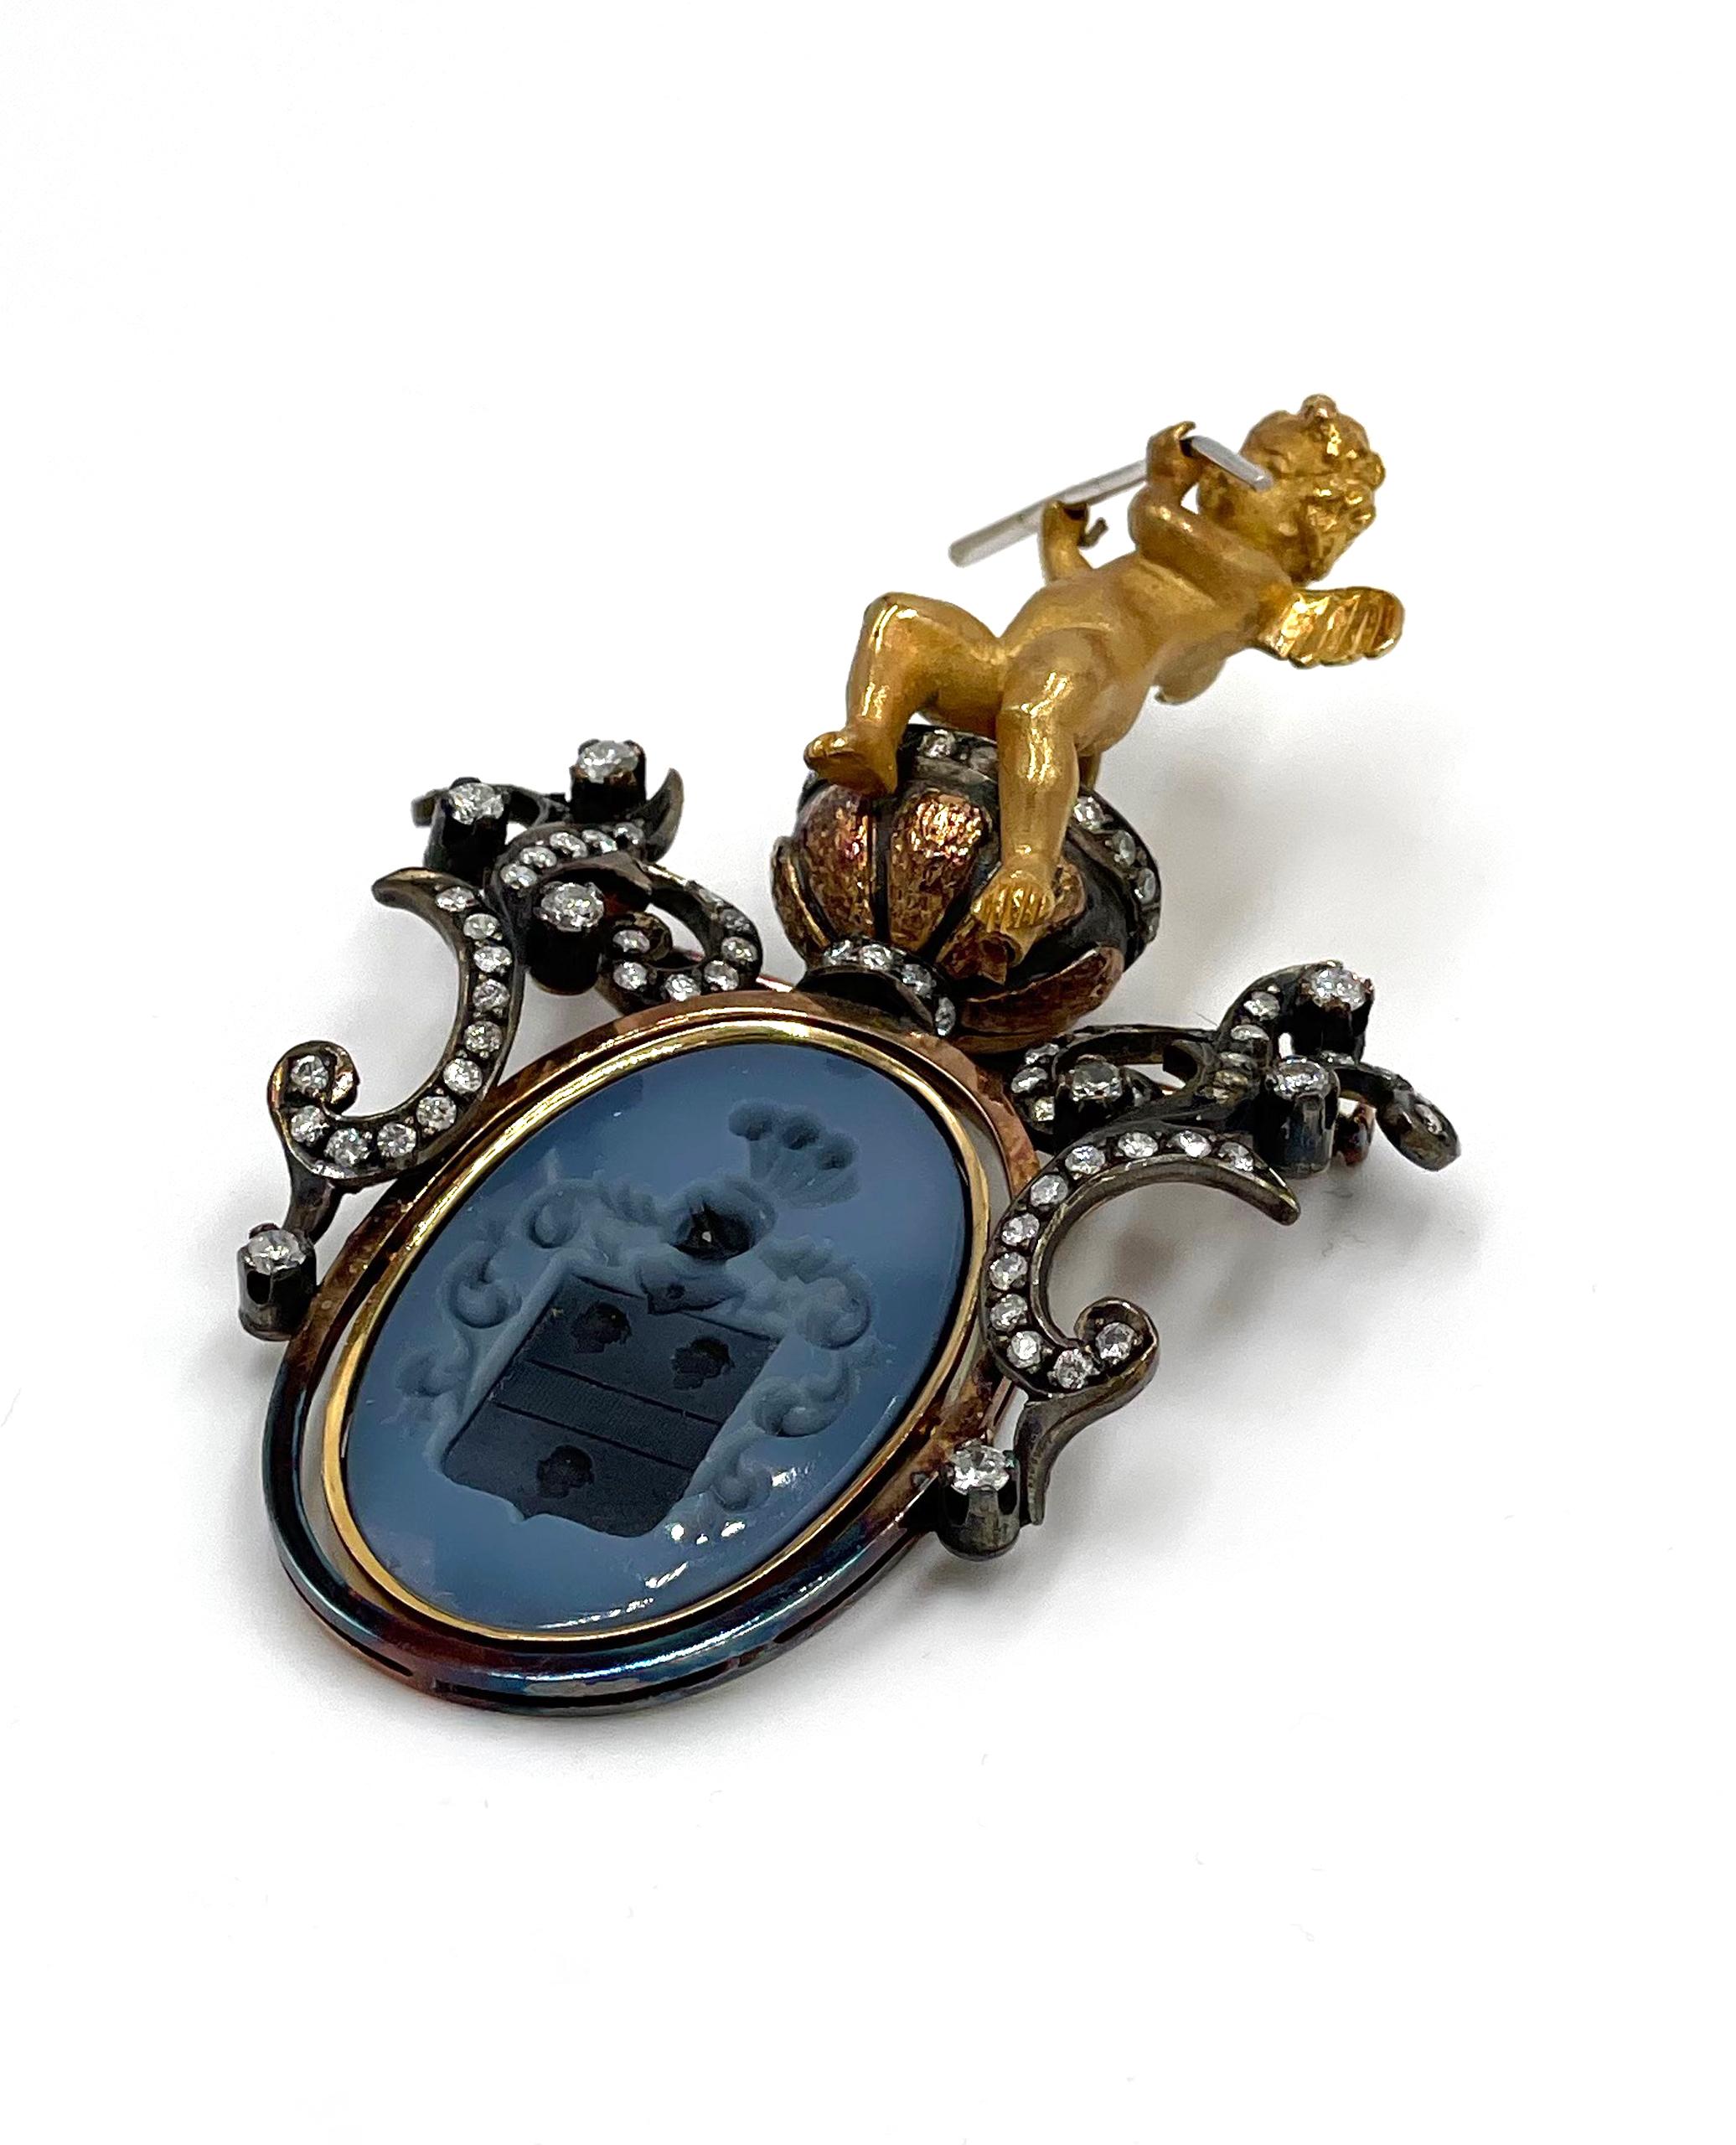 Pre owned vintage estate 18K yellow gold Intaglio and diamond brooch/pendant.  The brooch has a large full figured cherub at the top that is seated on an urn set with diamonds.  The oval frame below swivels and is bezel set with a blue/gray hard